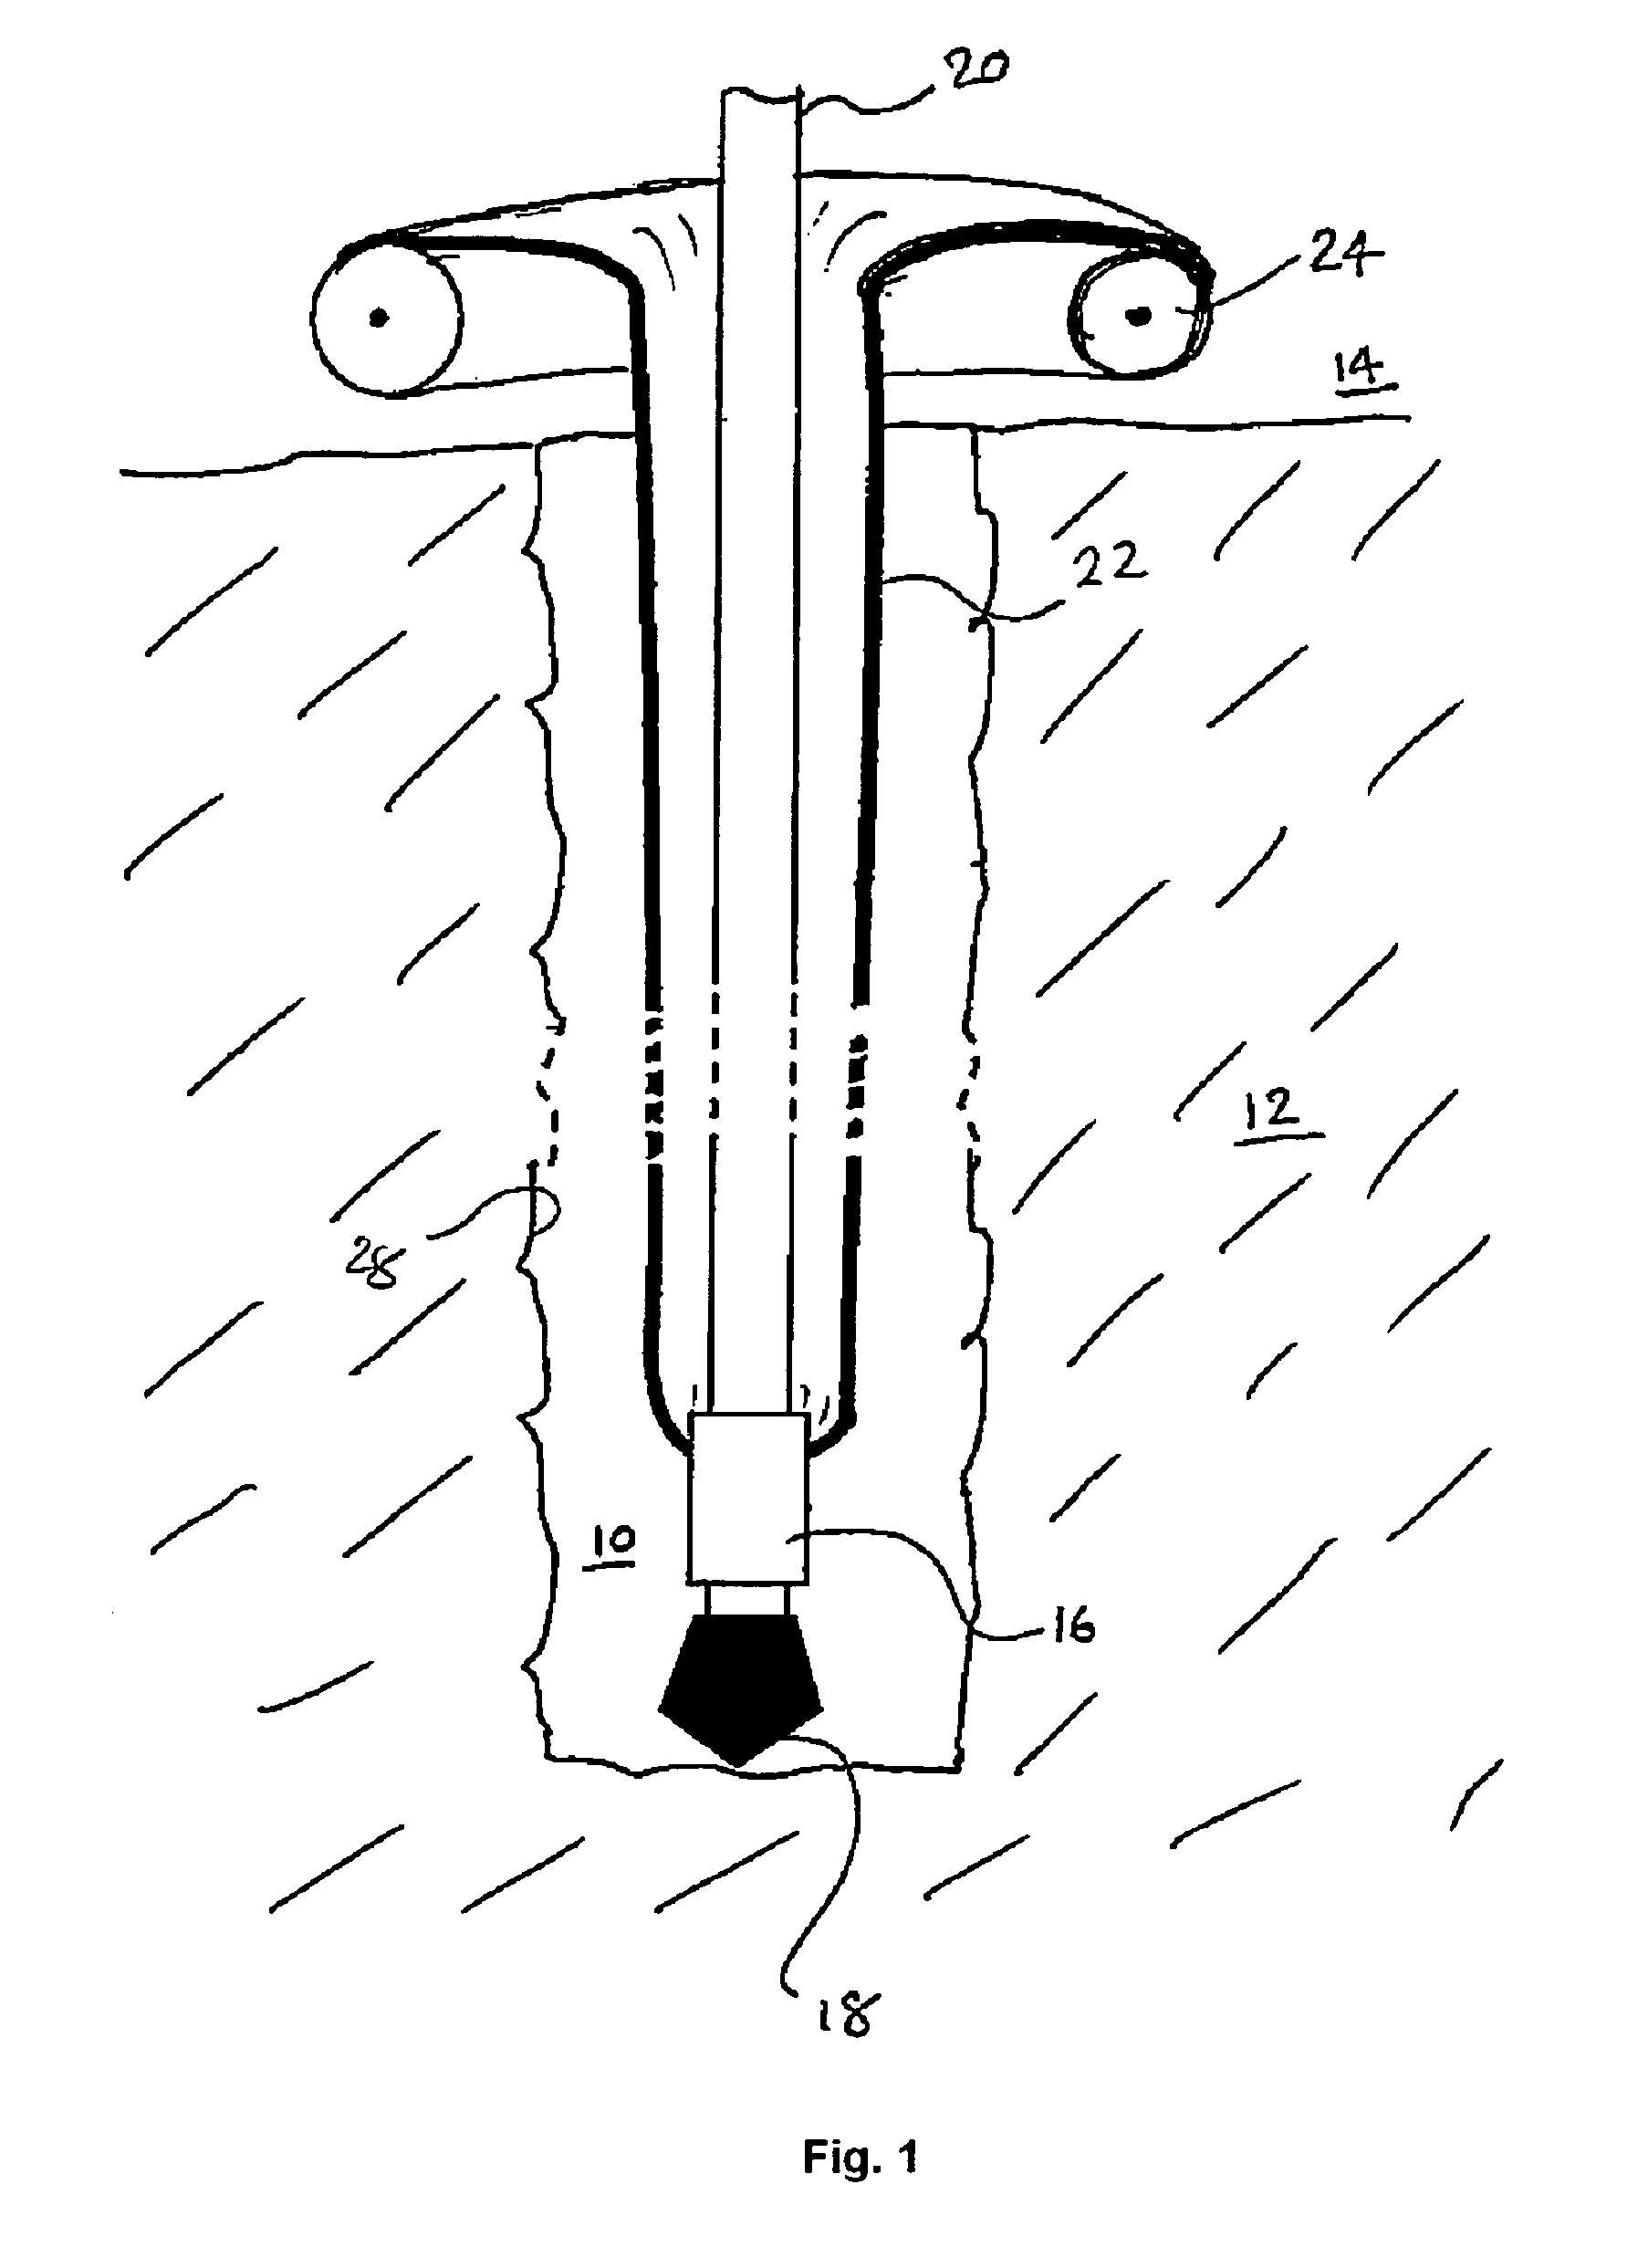 Methods and apparatus for well construction